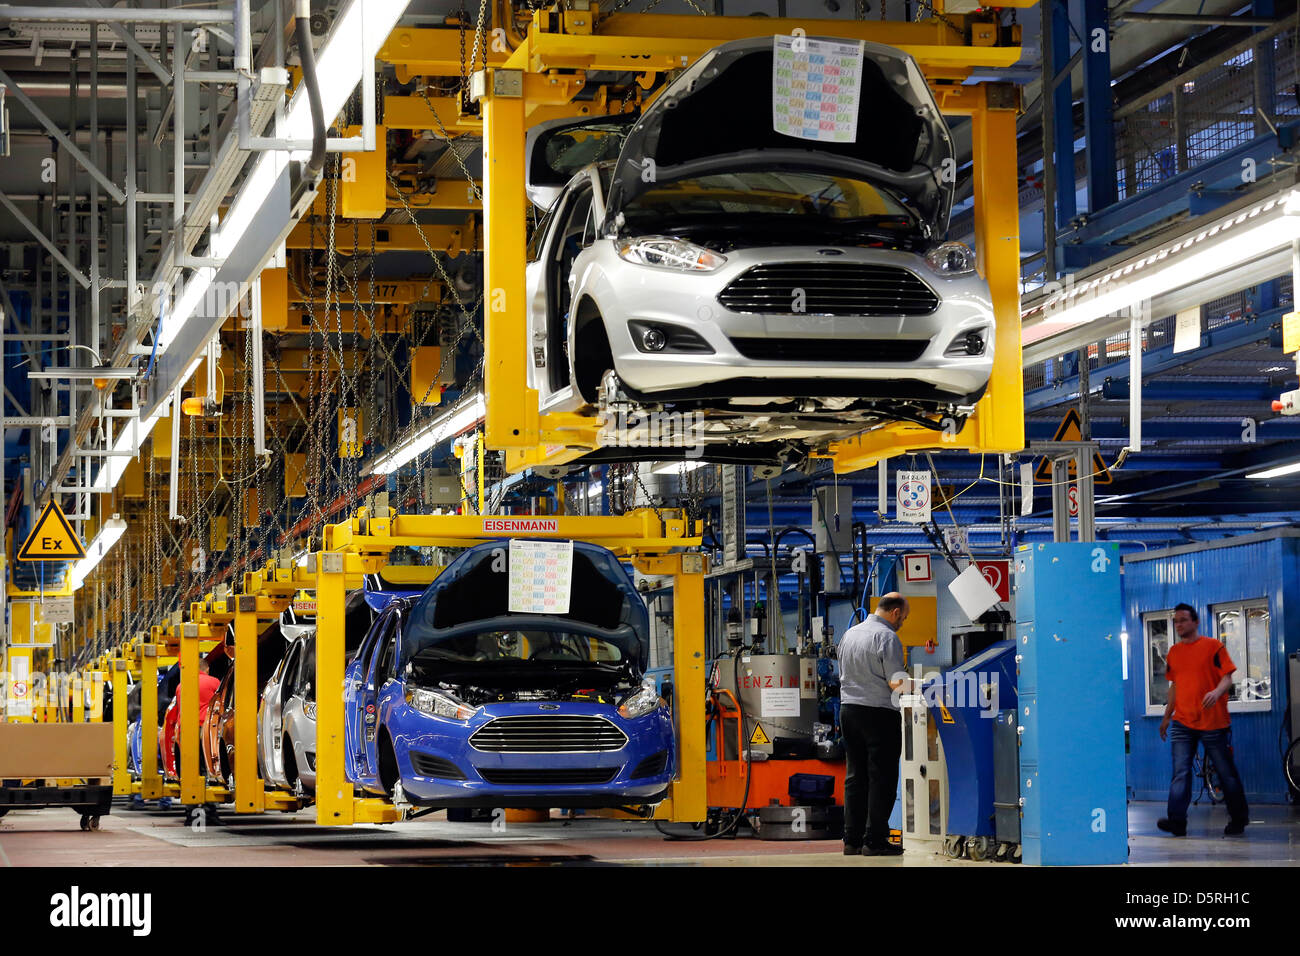 Ford assembly plants in germany #5